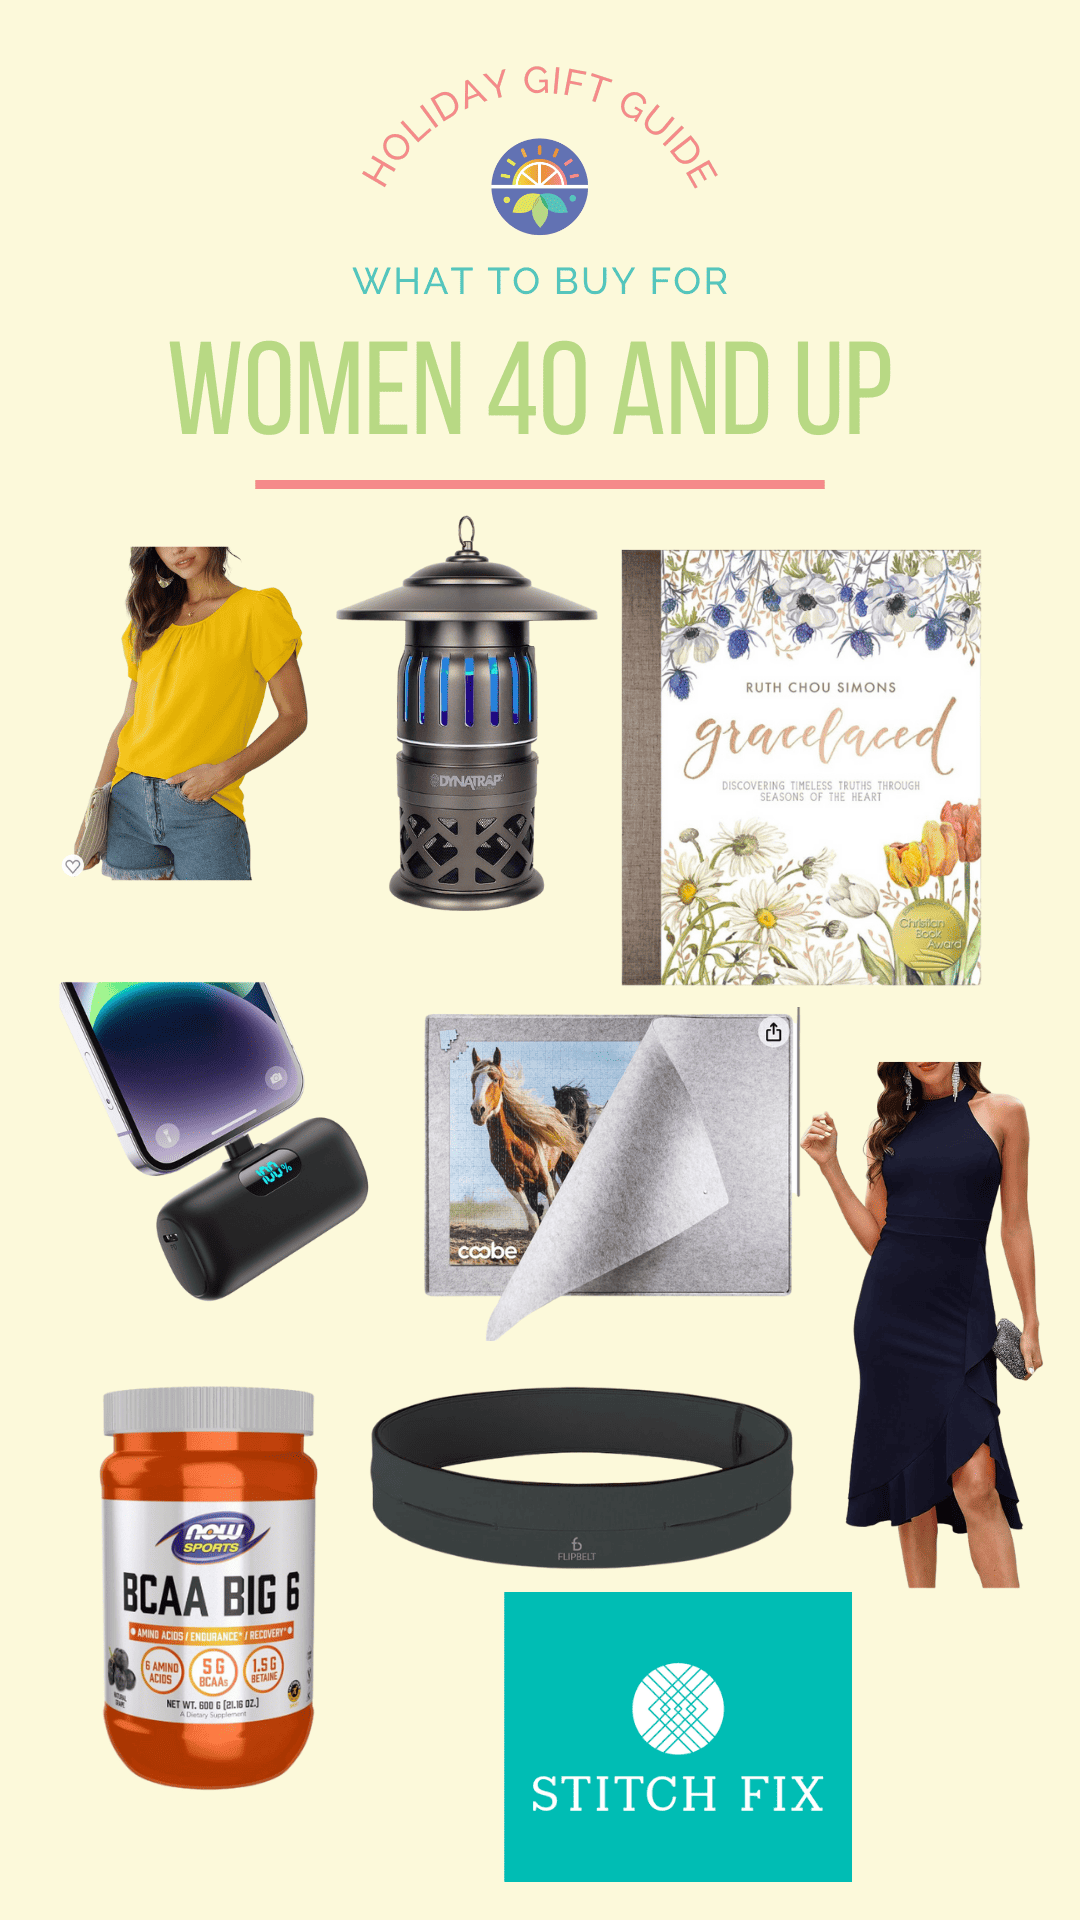 holiday gift guide. what to buy for women 40 and up.